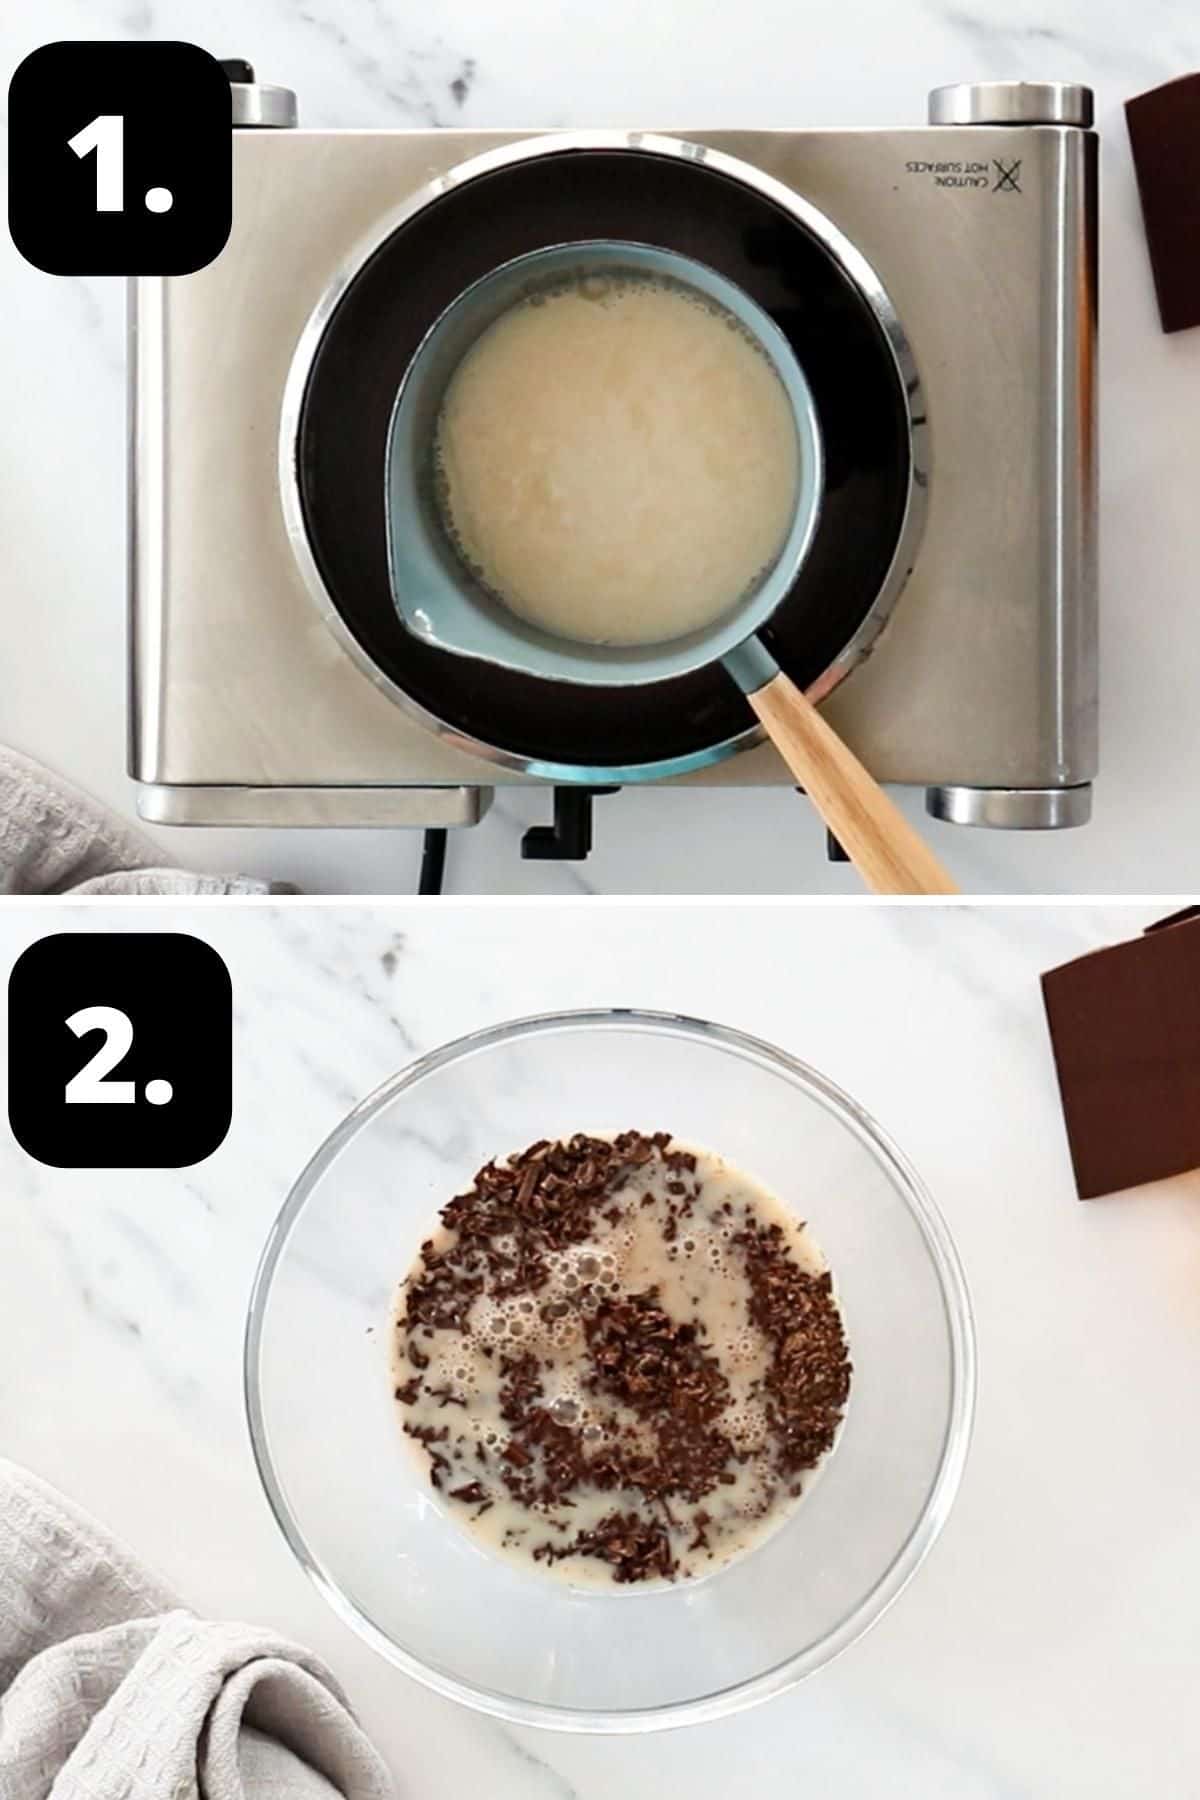 Steps 1-2 of preparing this recipe - heating the soy milk in a saucepan and pouring over the chocolate to melt it.